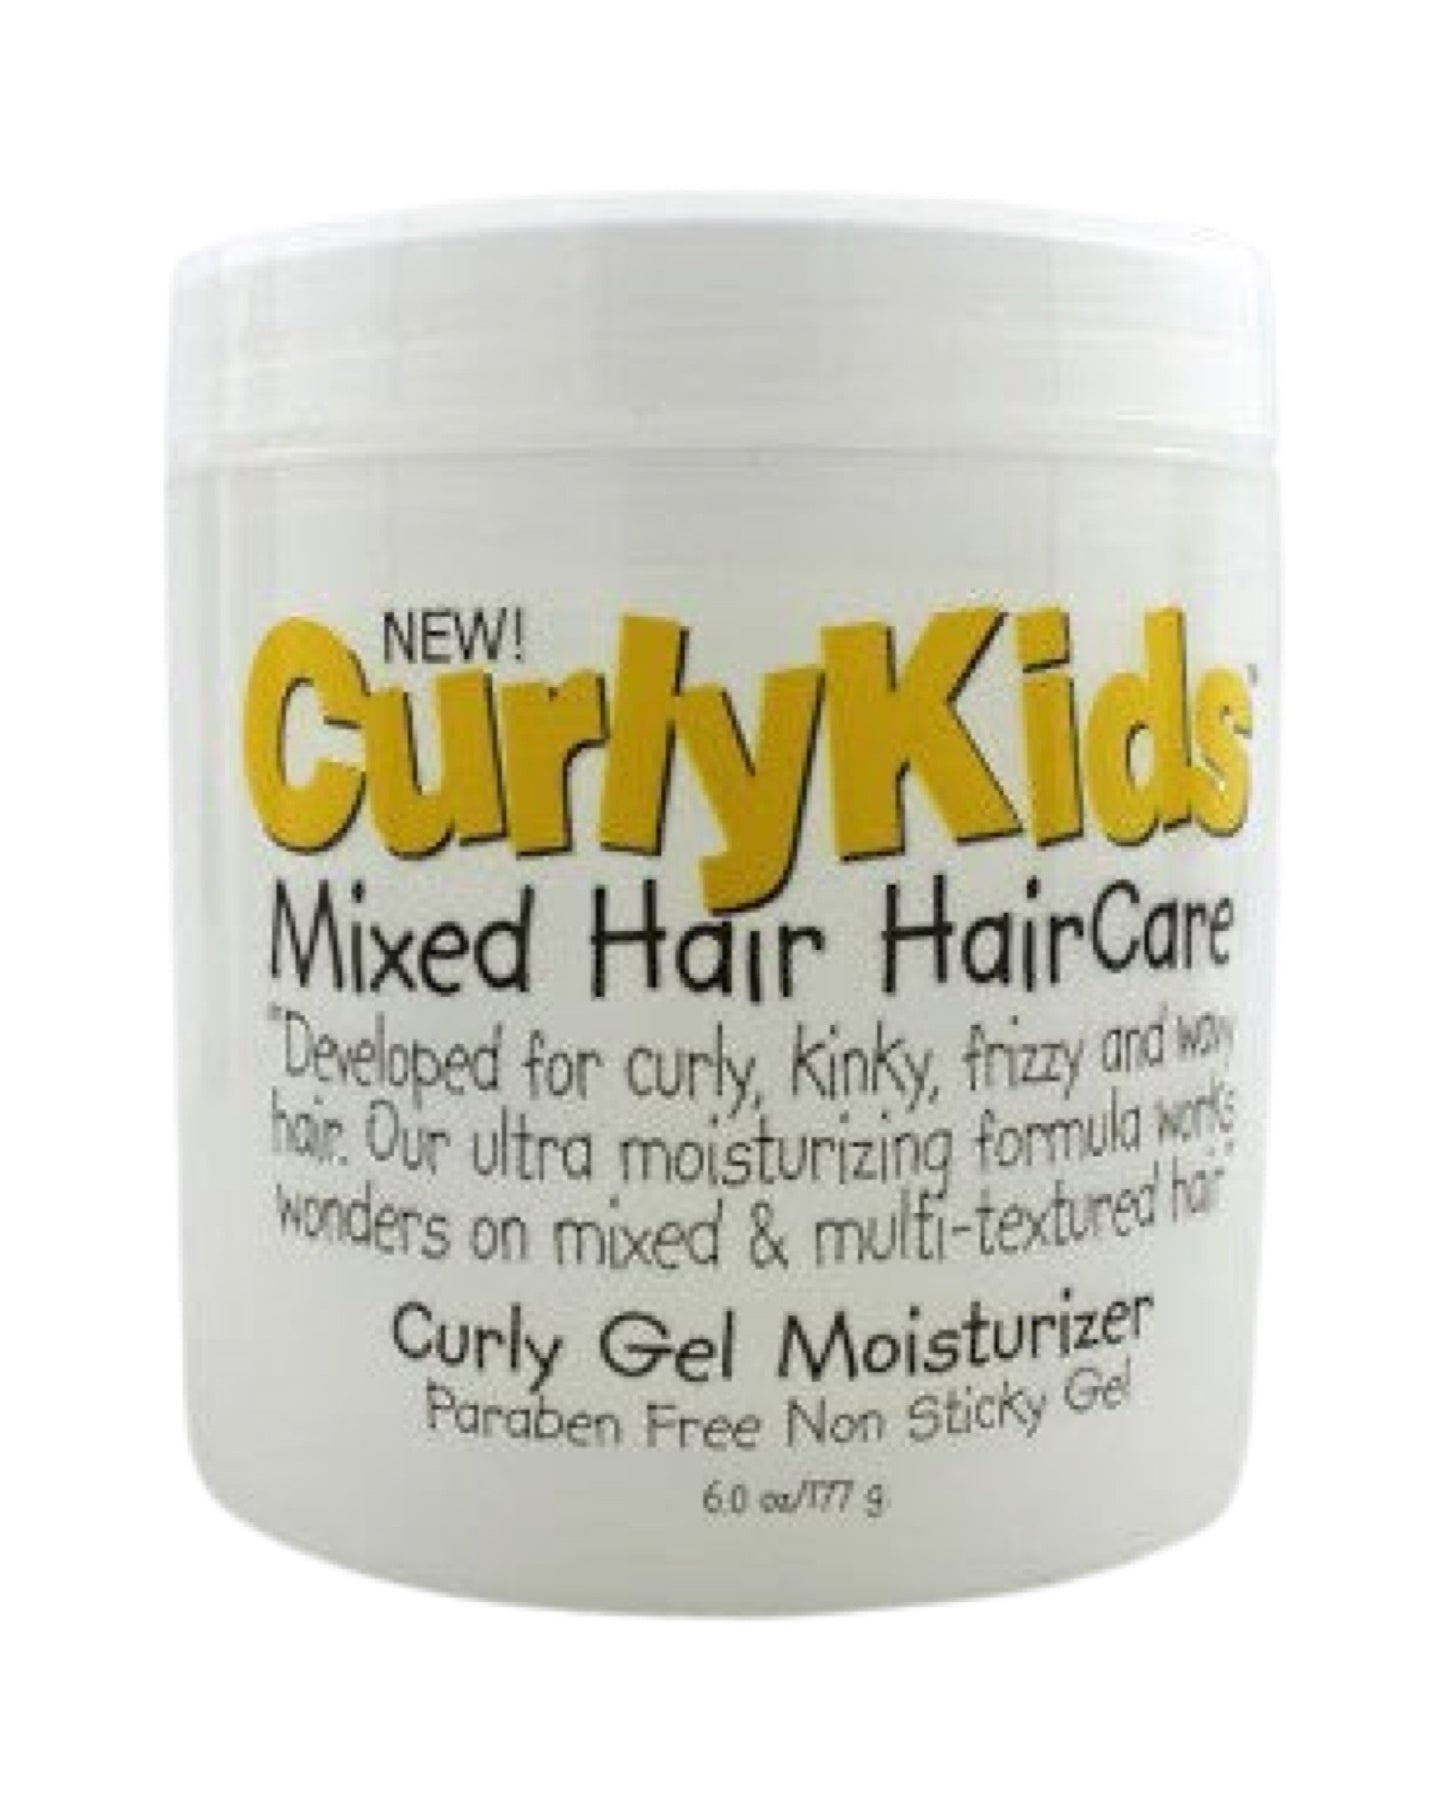 Curly Kids Mixed Hair Haircare Curly Gel Moisturizer 6 Oz